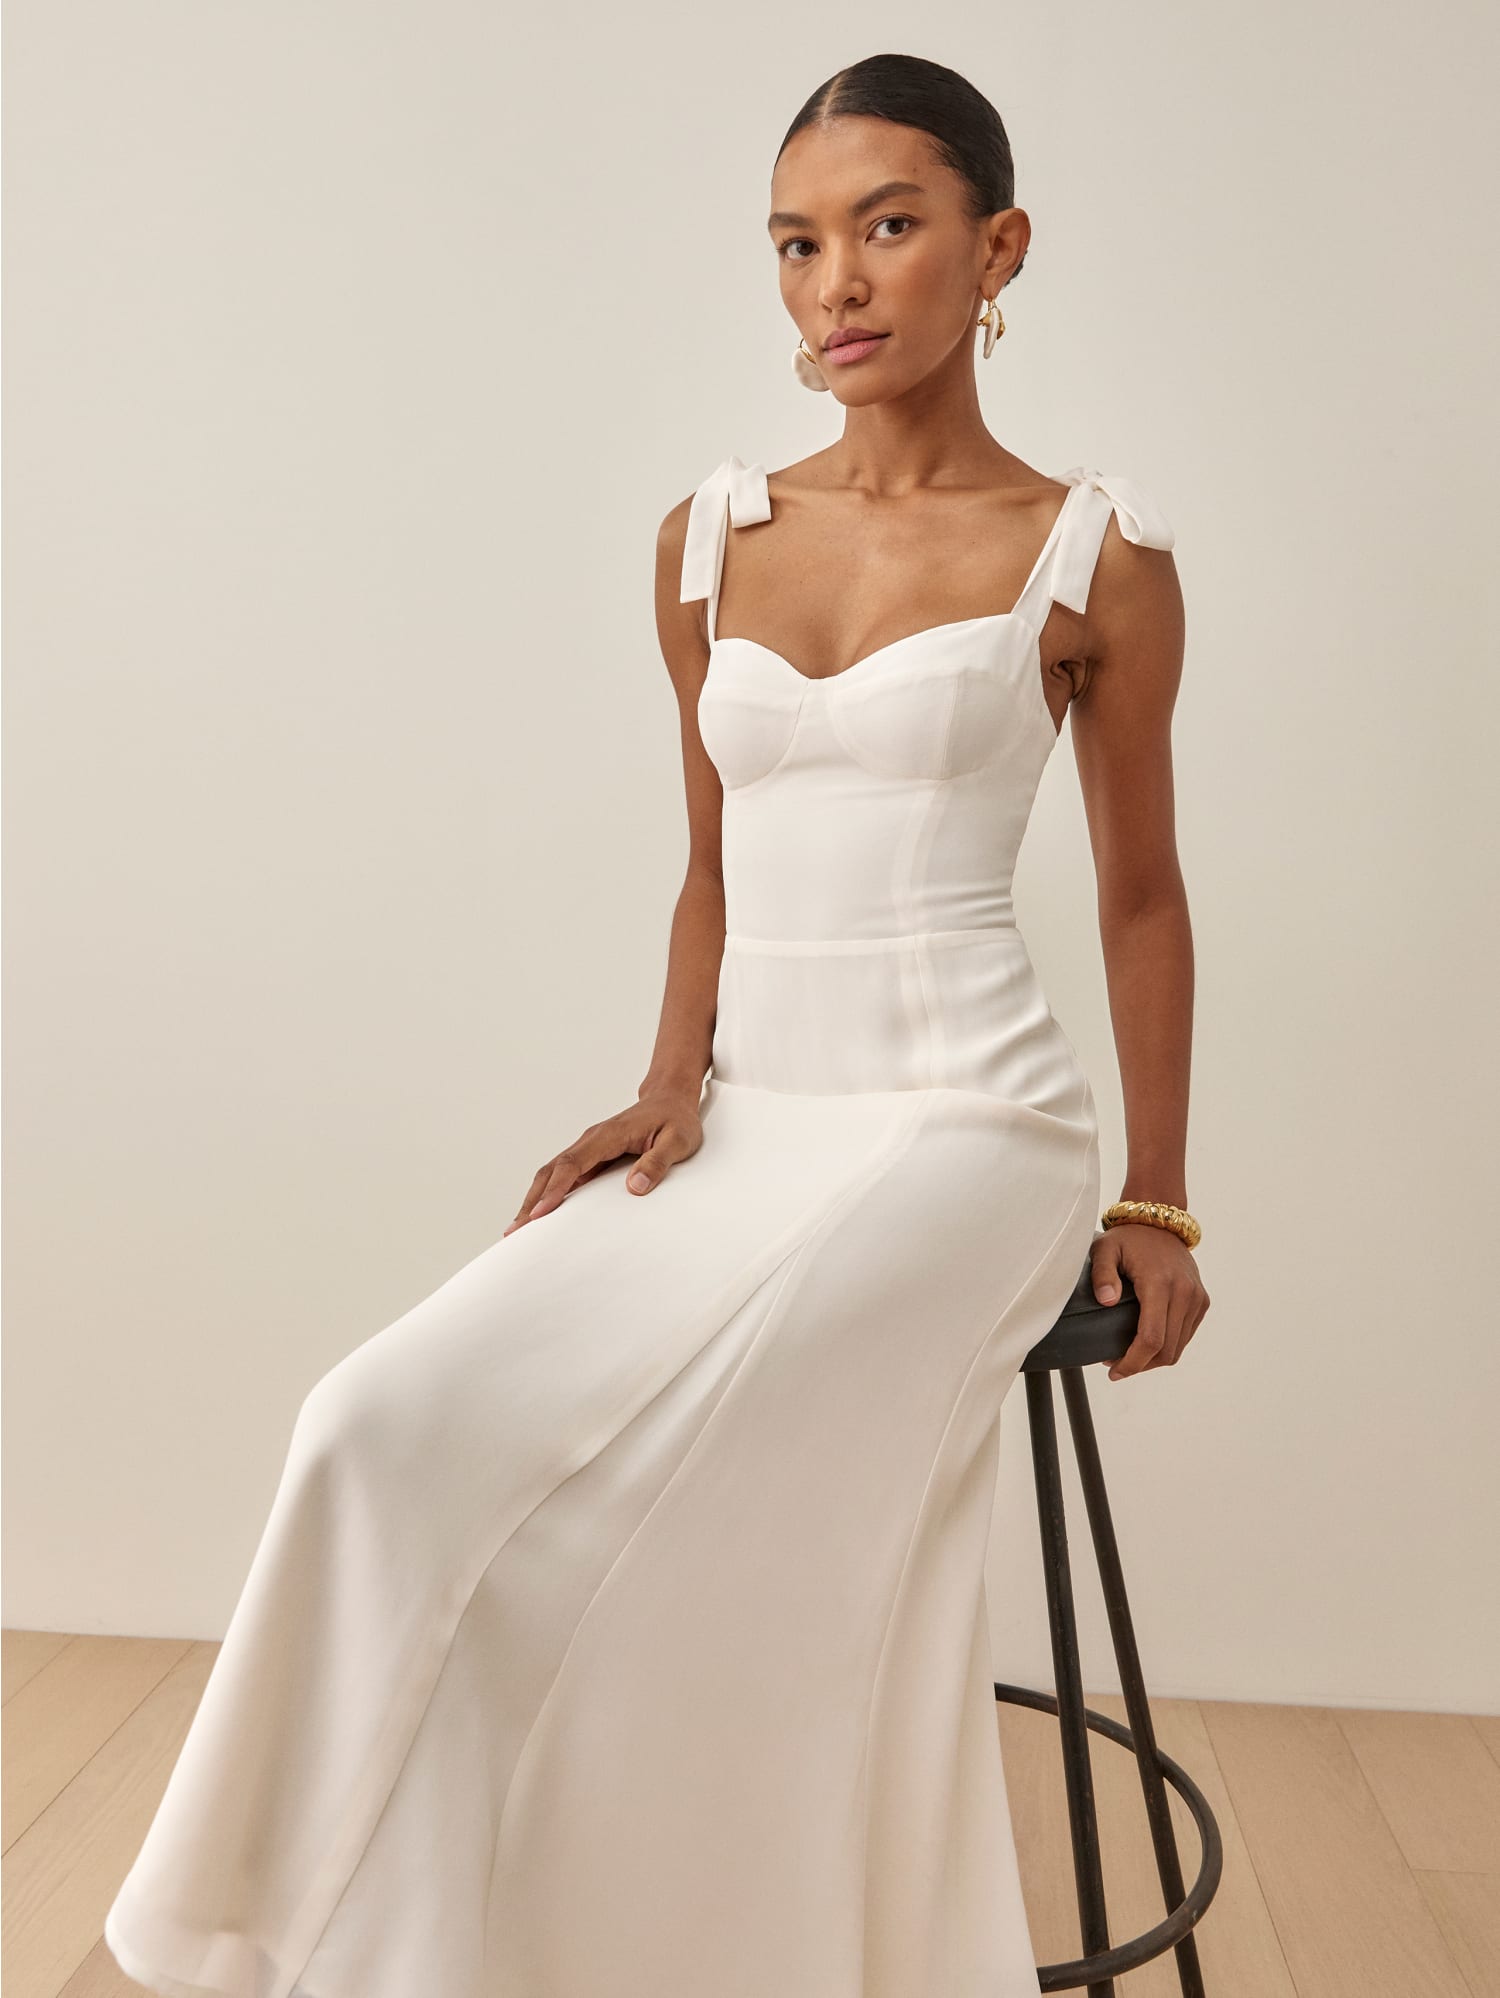 A white midi dress with bowtie straps and a sweetheart neckline for a bride. The dress is from Reformation.